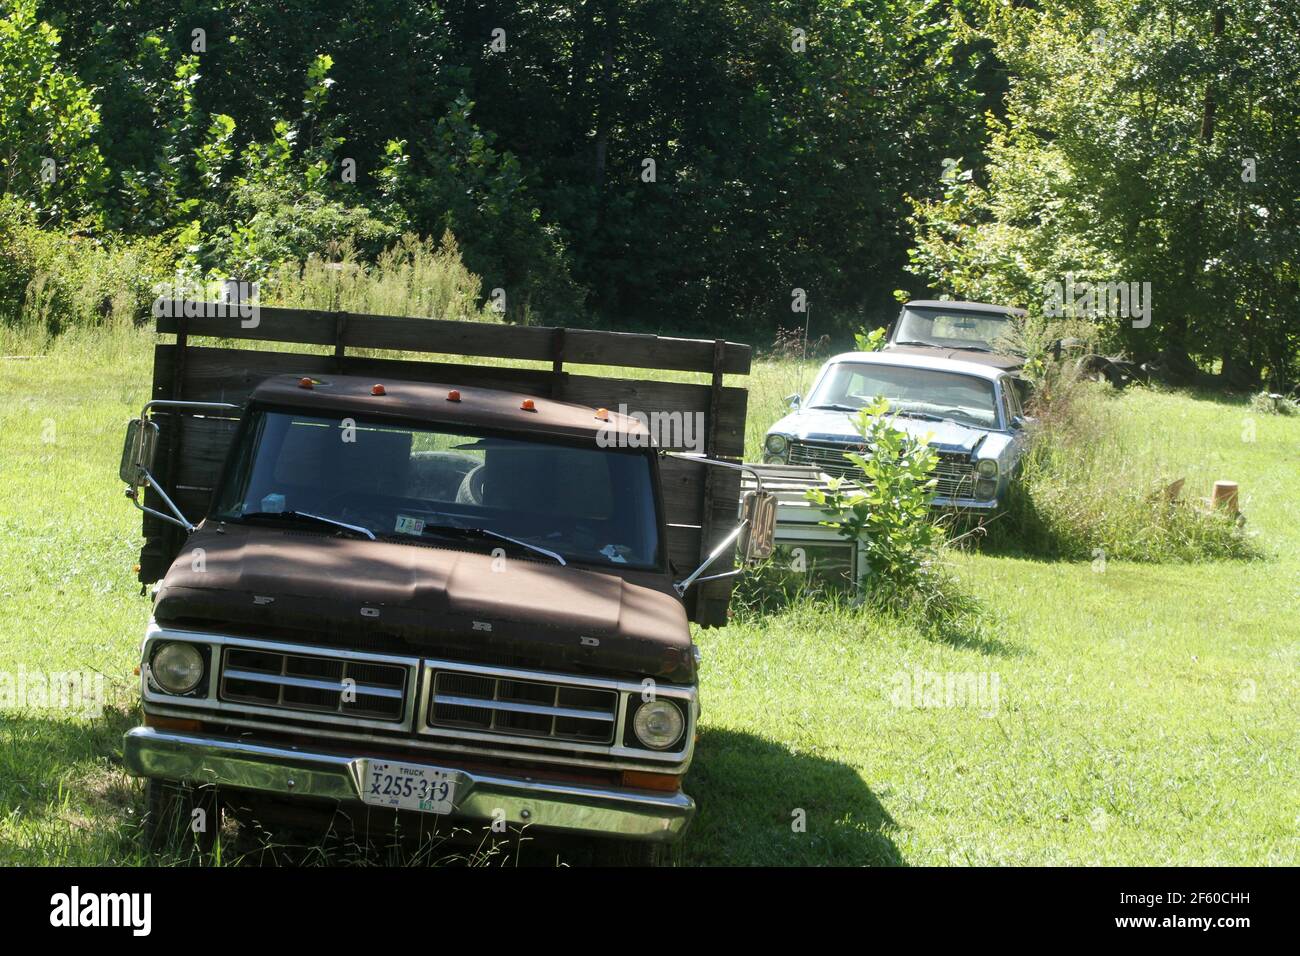 Old pick-up truck on a private property in rural Virginia, USA Stock Photo